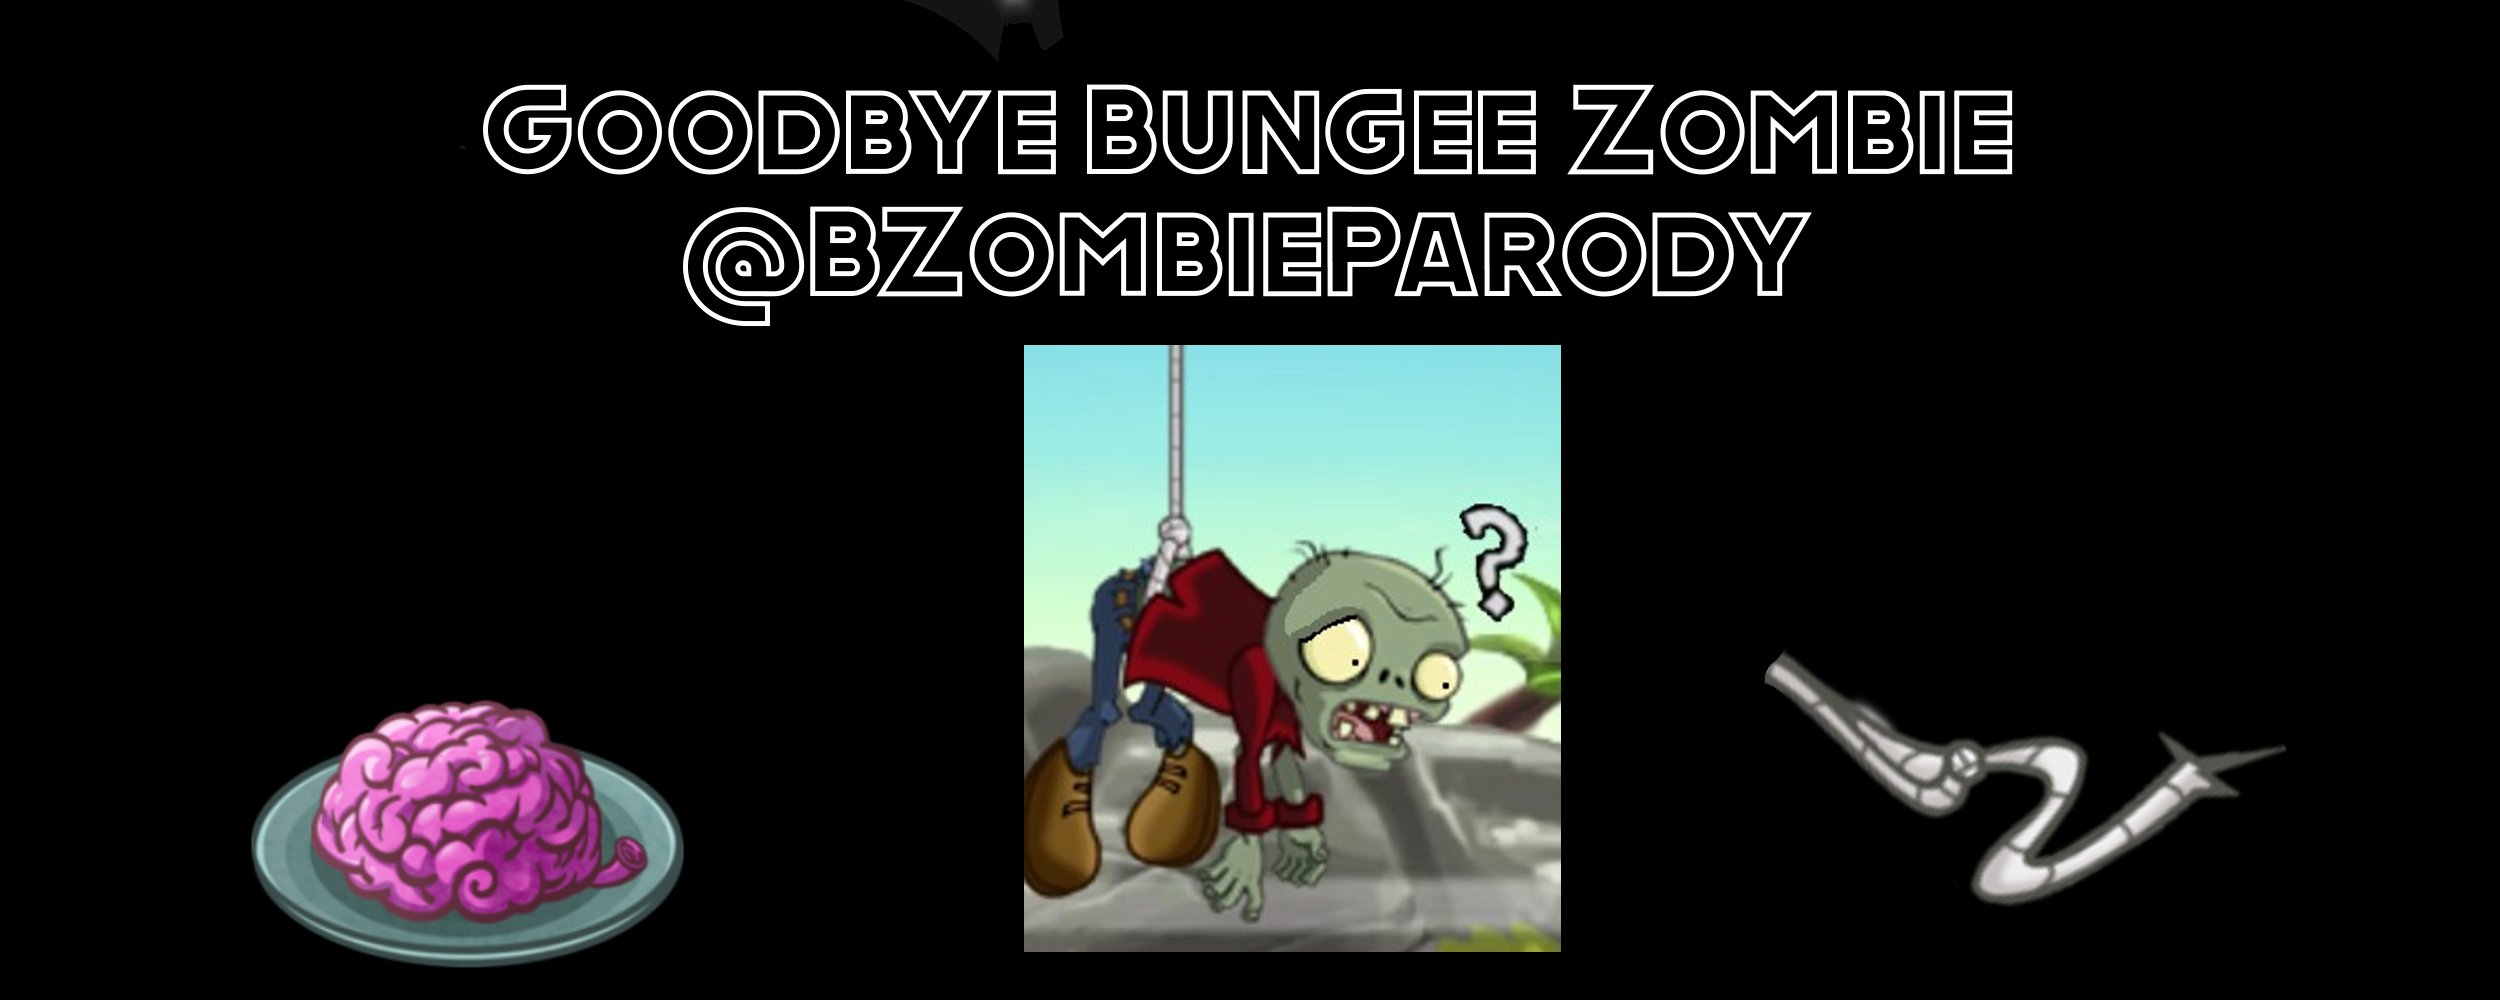 bungee zombie returns in pvz 2 chinese edition : r/PlantsVSZombies